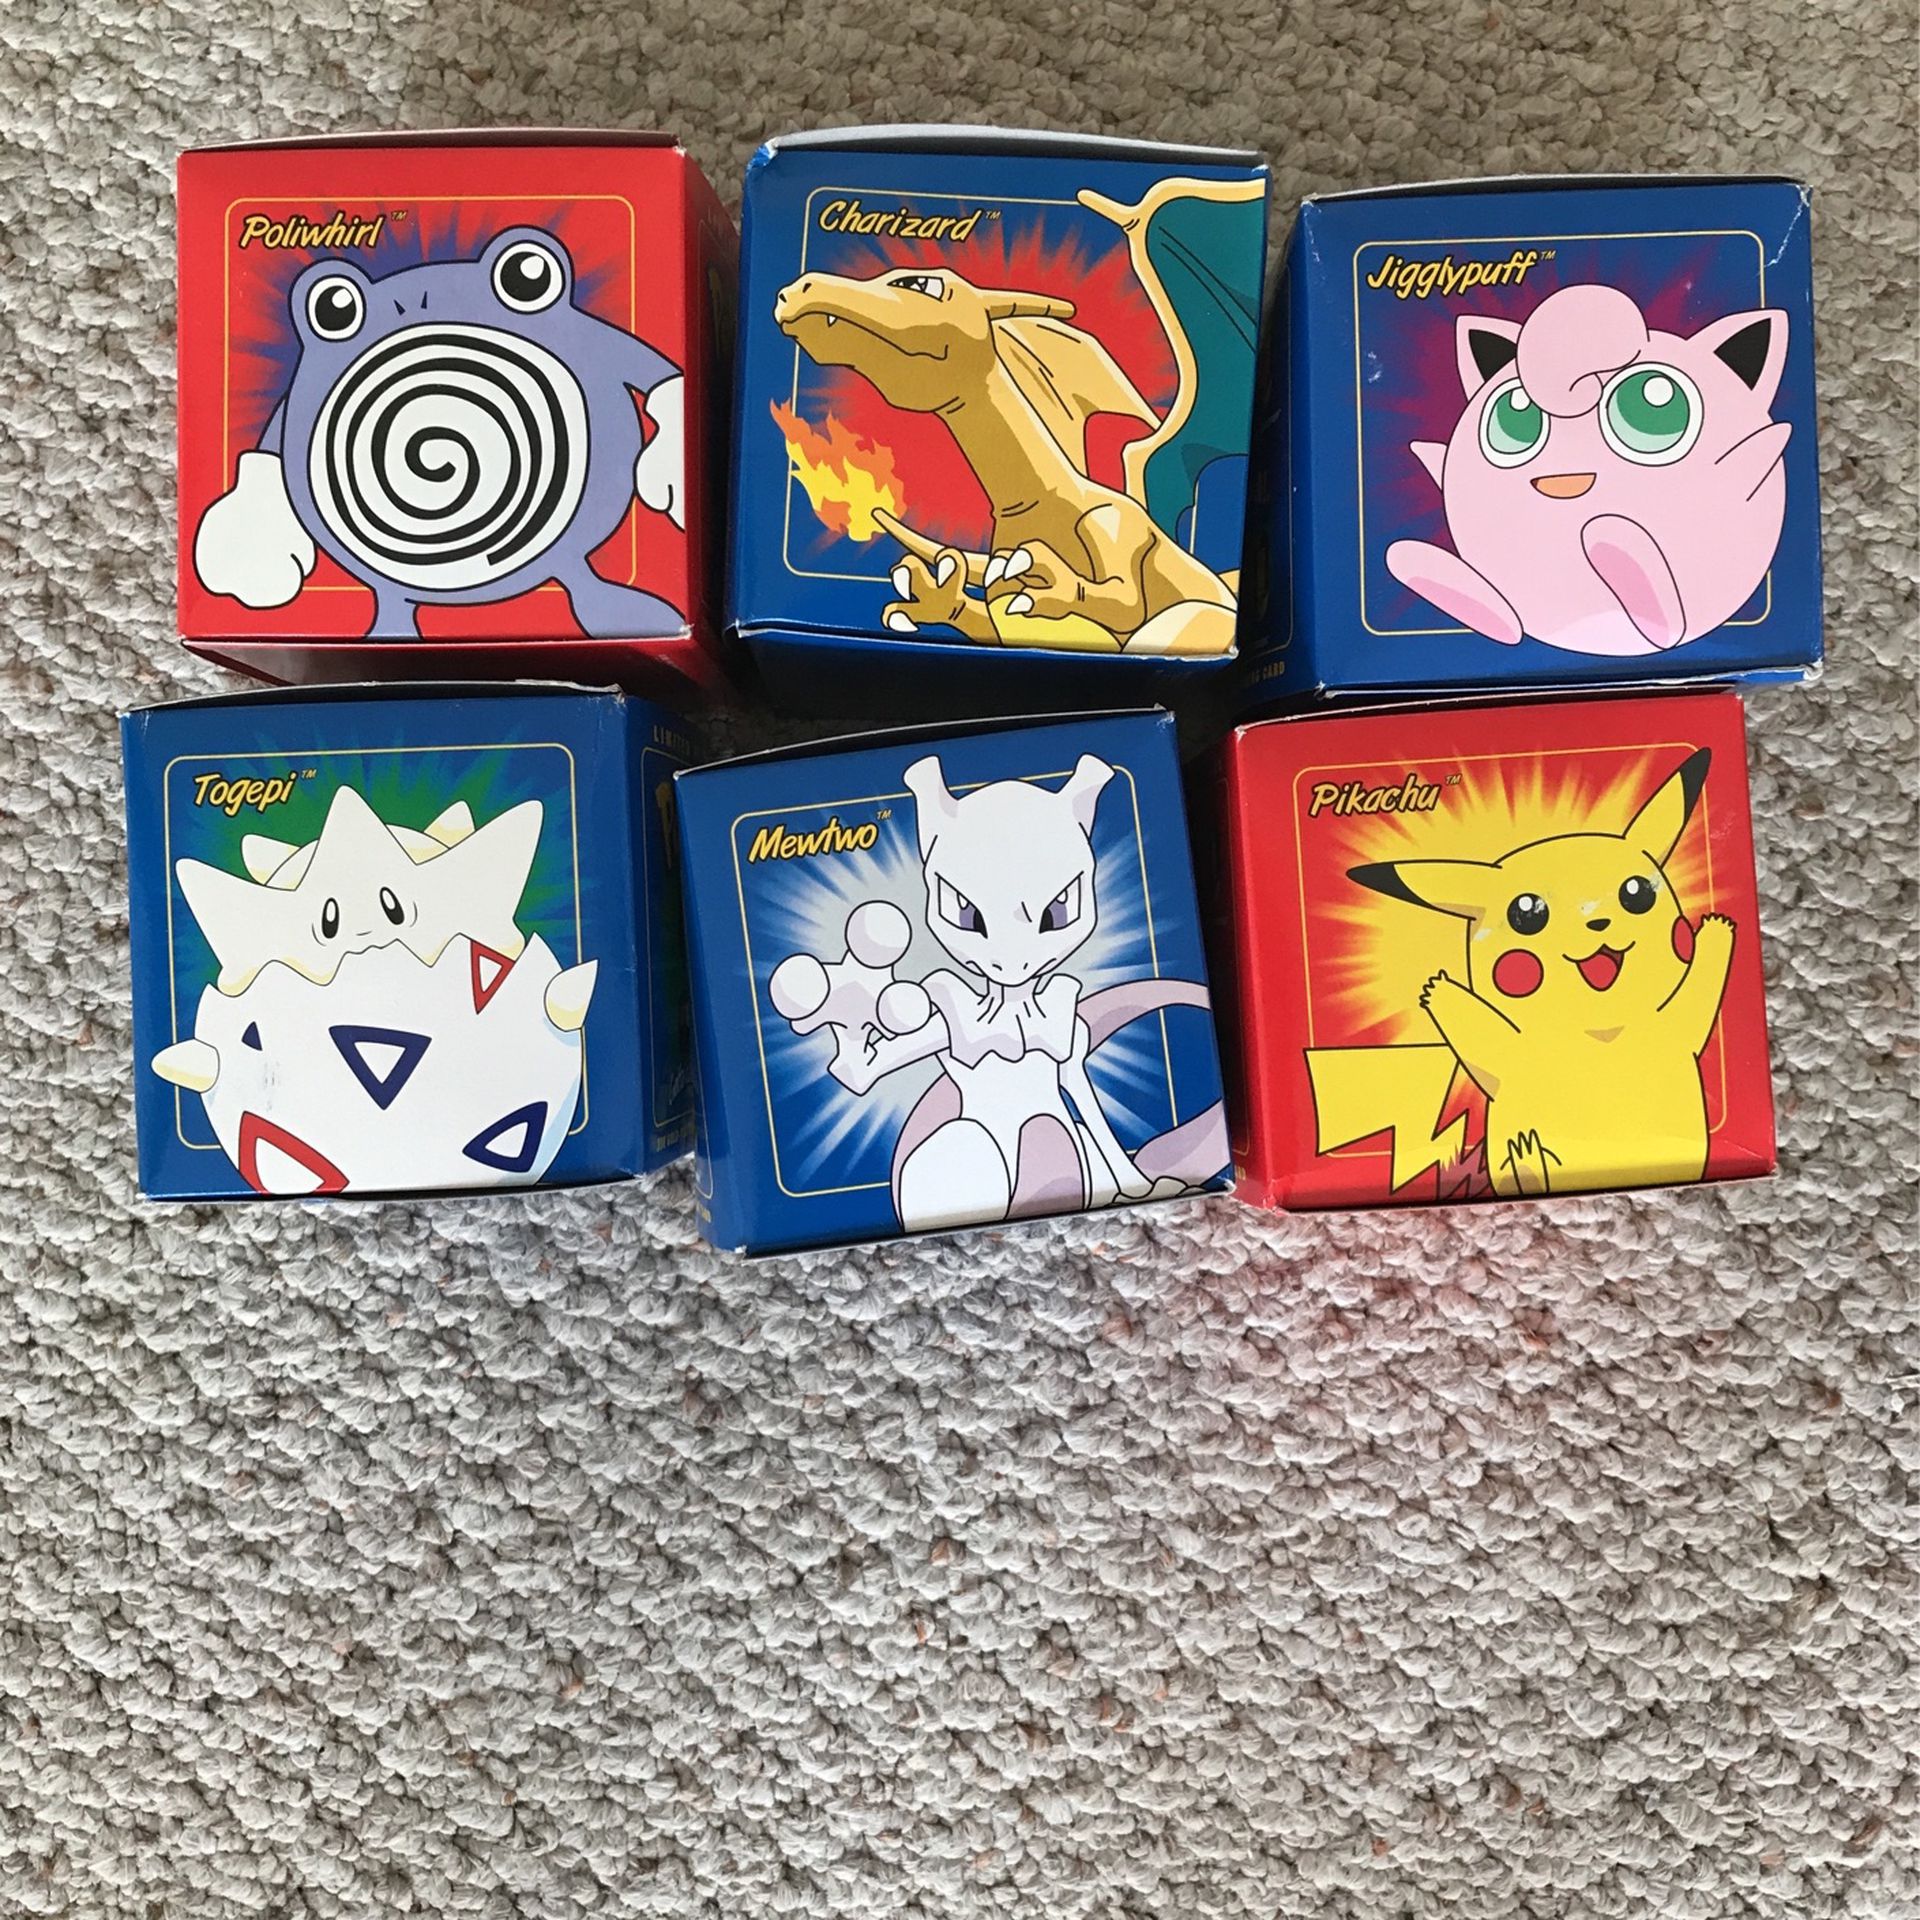 Pokemon Limited Edition 23k Gold-Plated Trading Cards